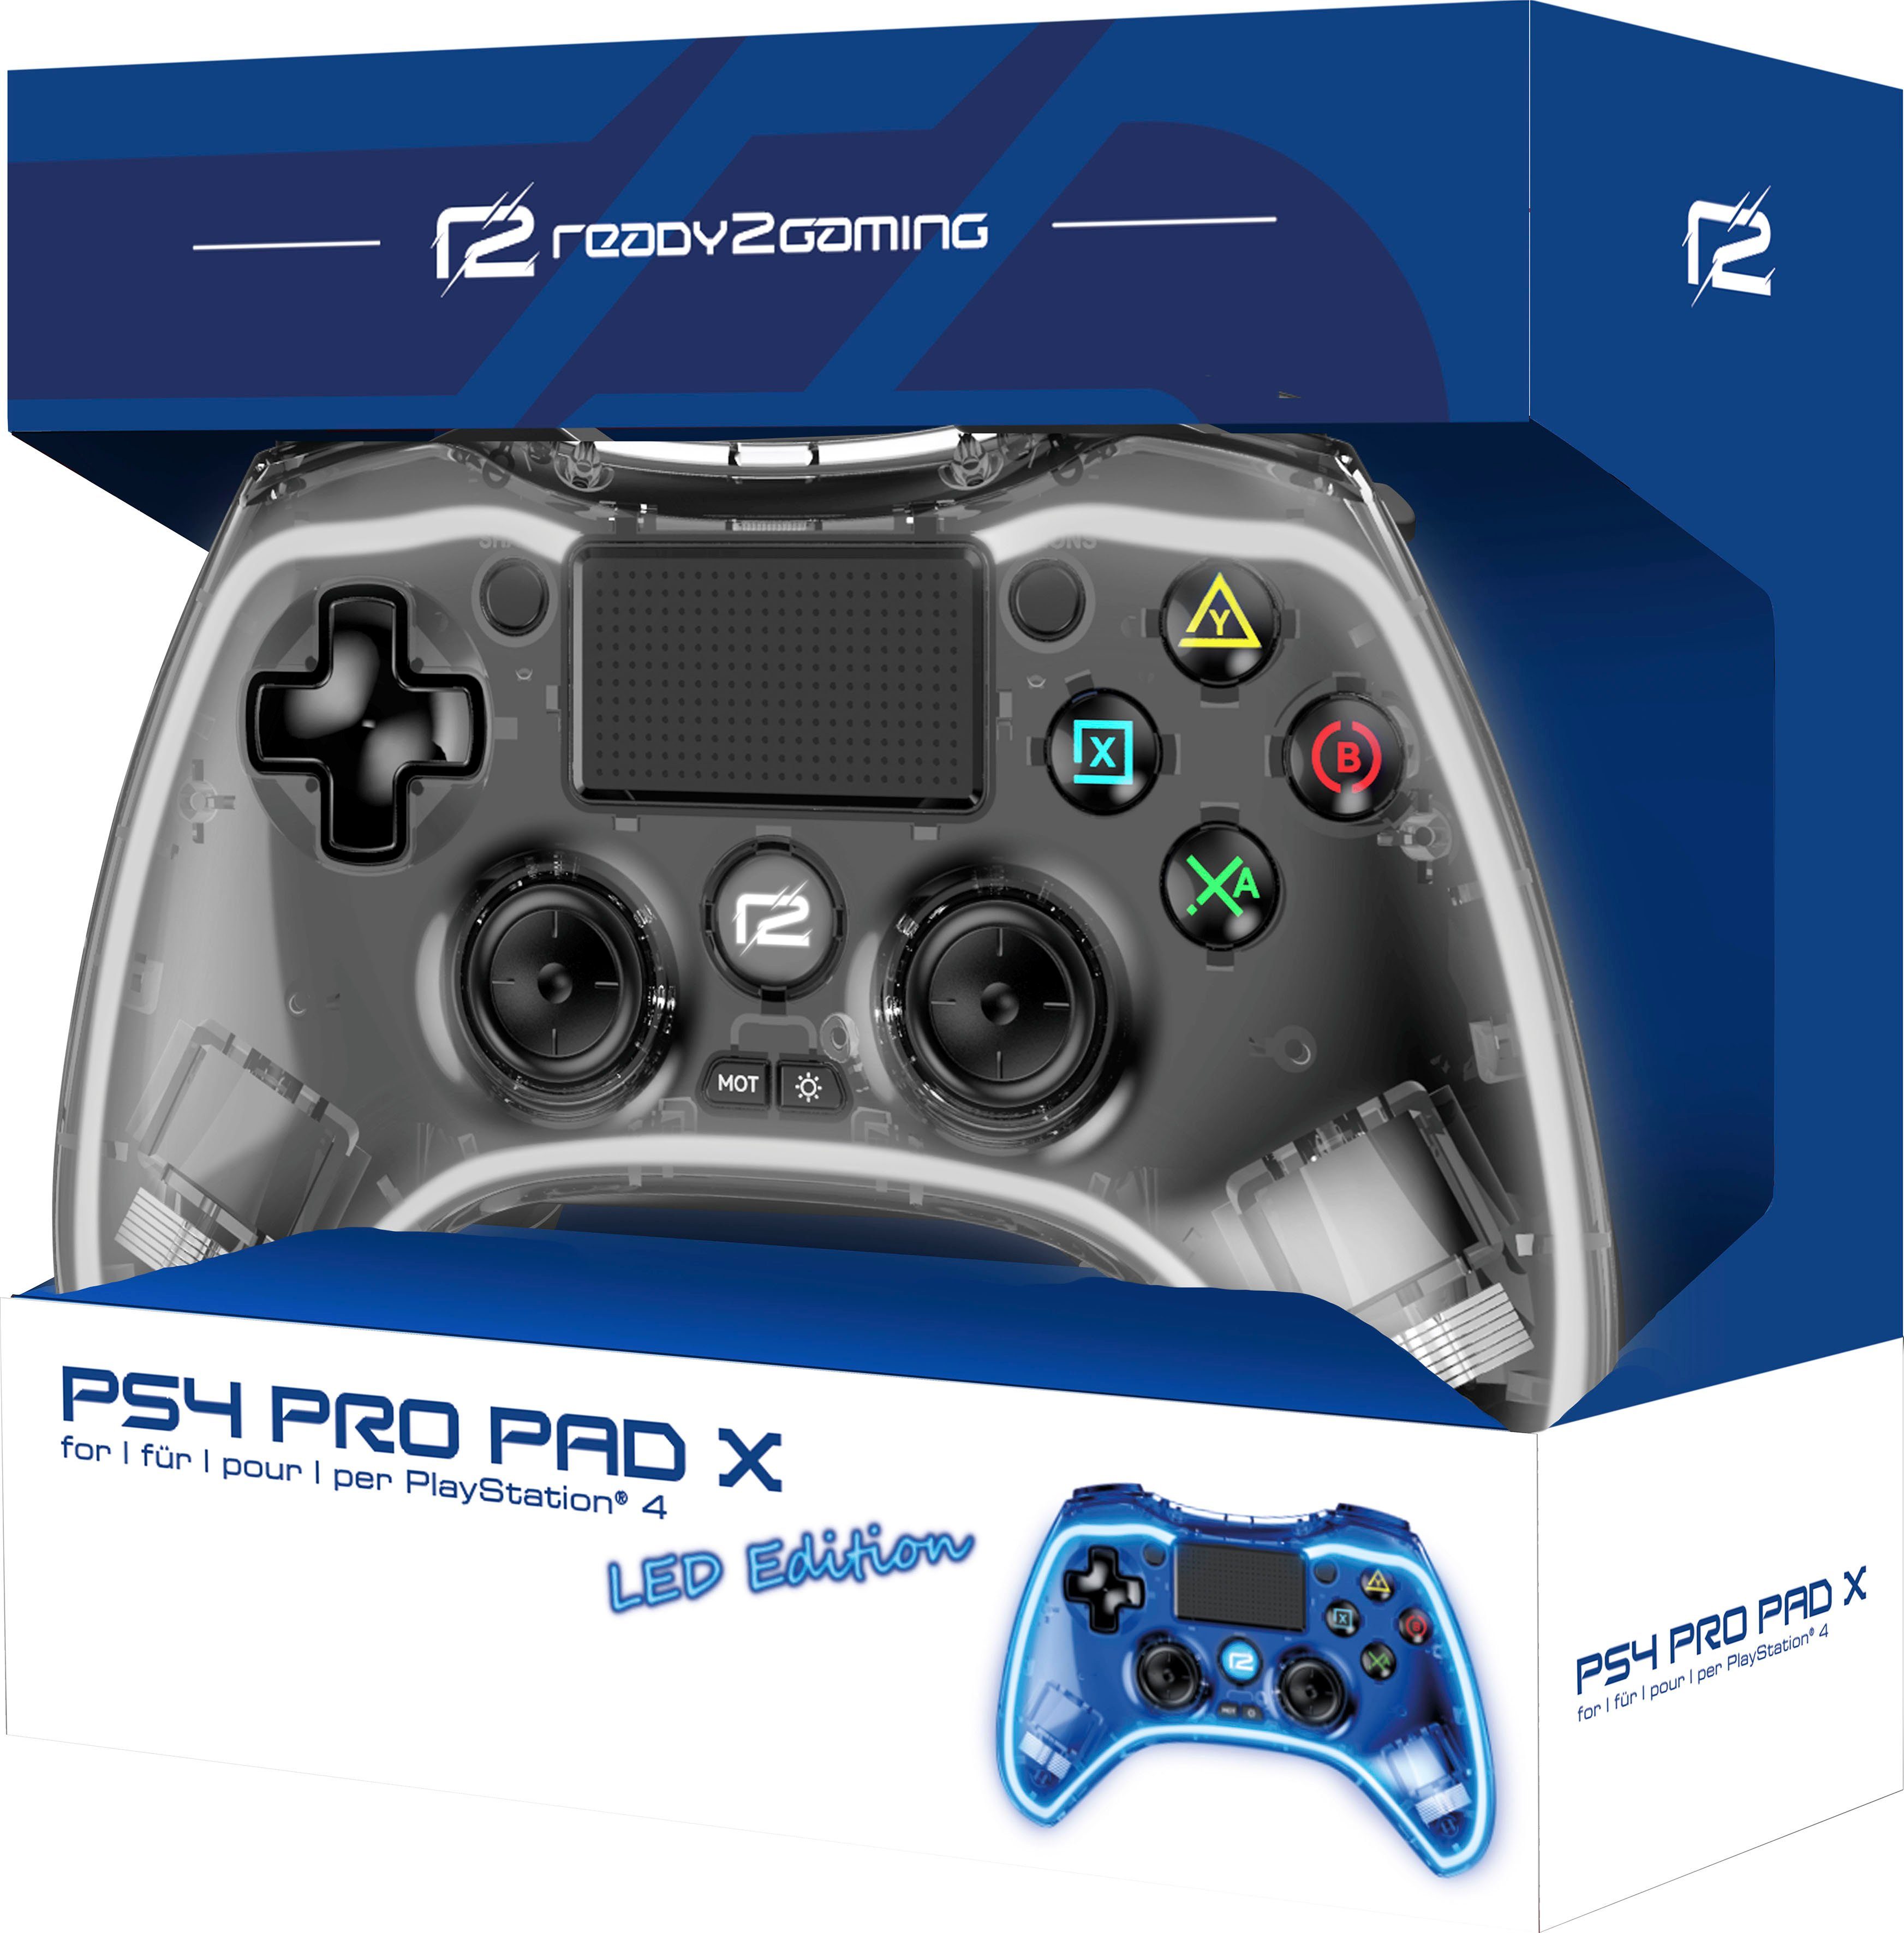 blauer transparent Edition Ready2gaming PS4 Pro Pad Beleuchtung LED Controller X mit Led